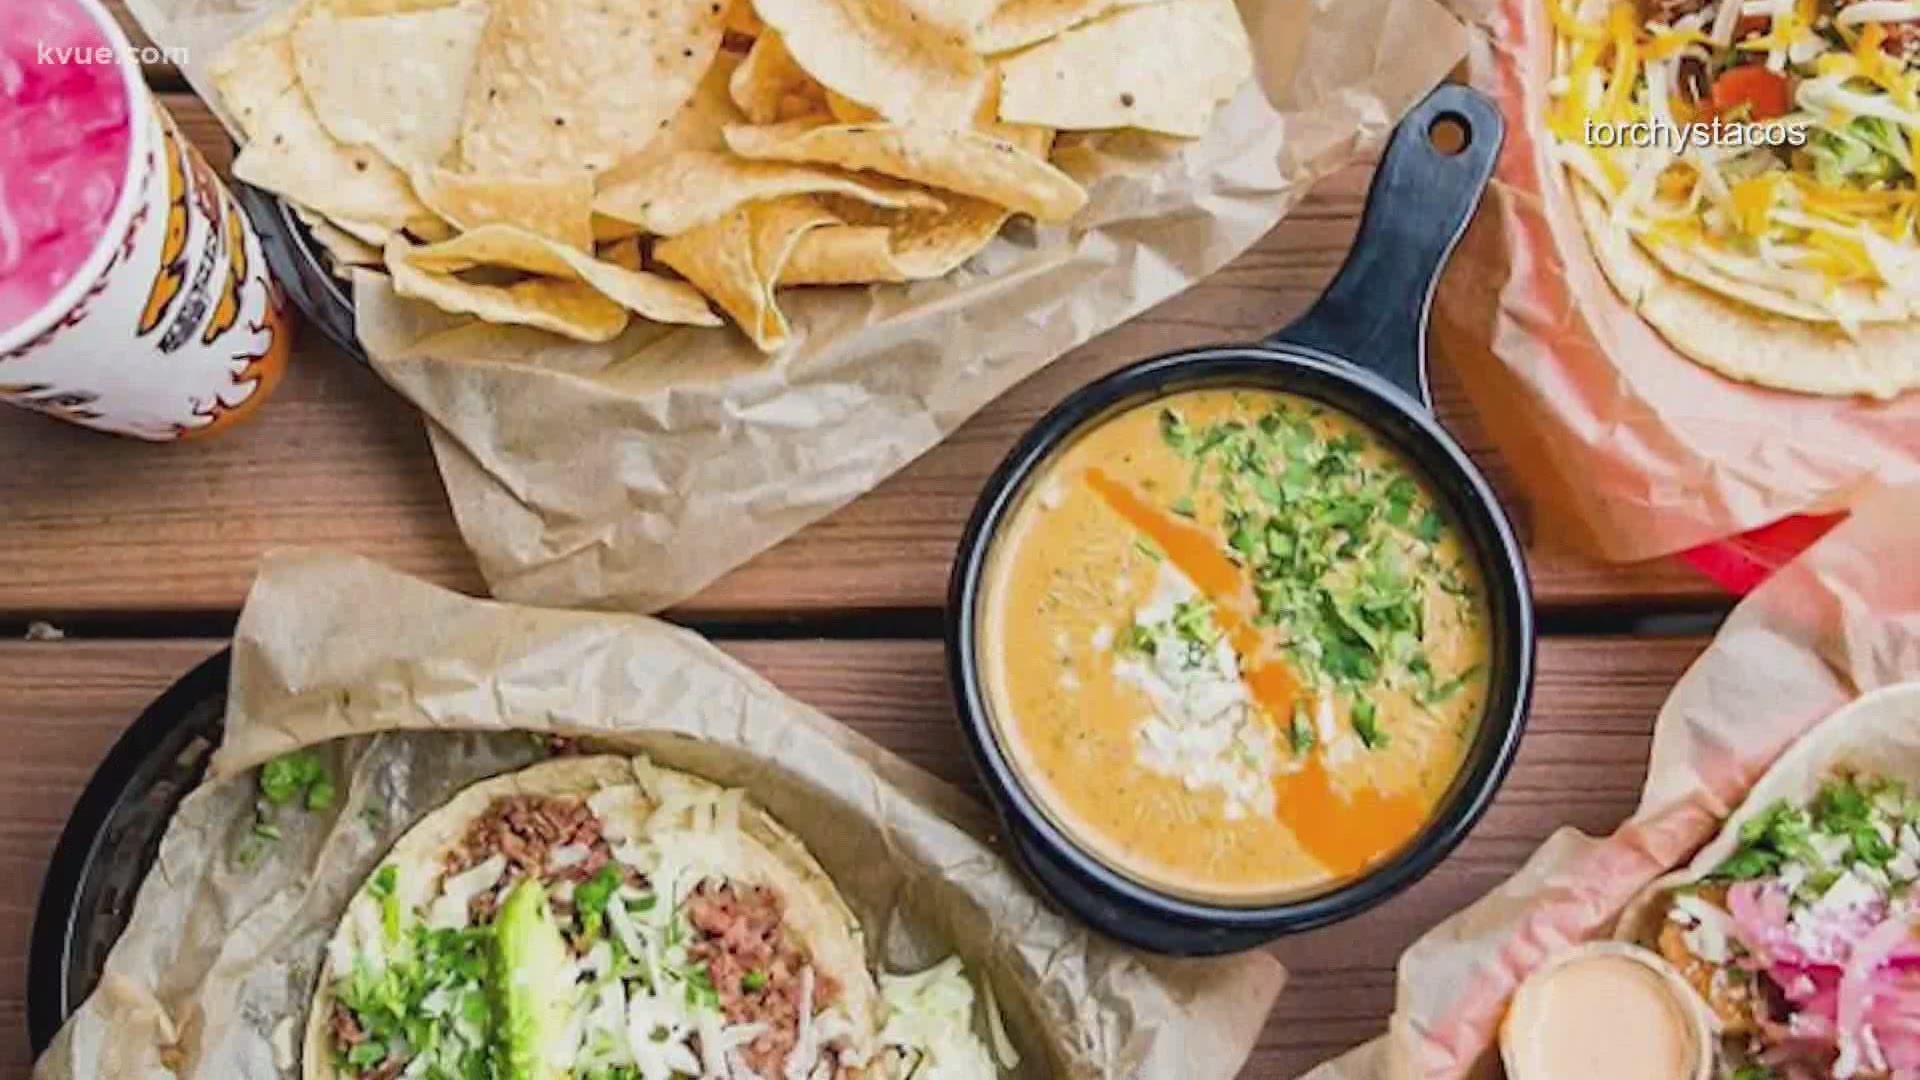 Austin-based Torchy's Tacos is expanding.